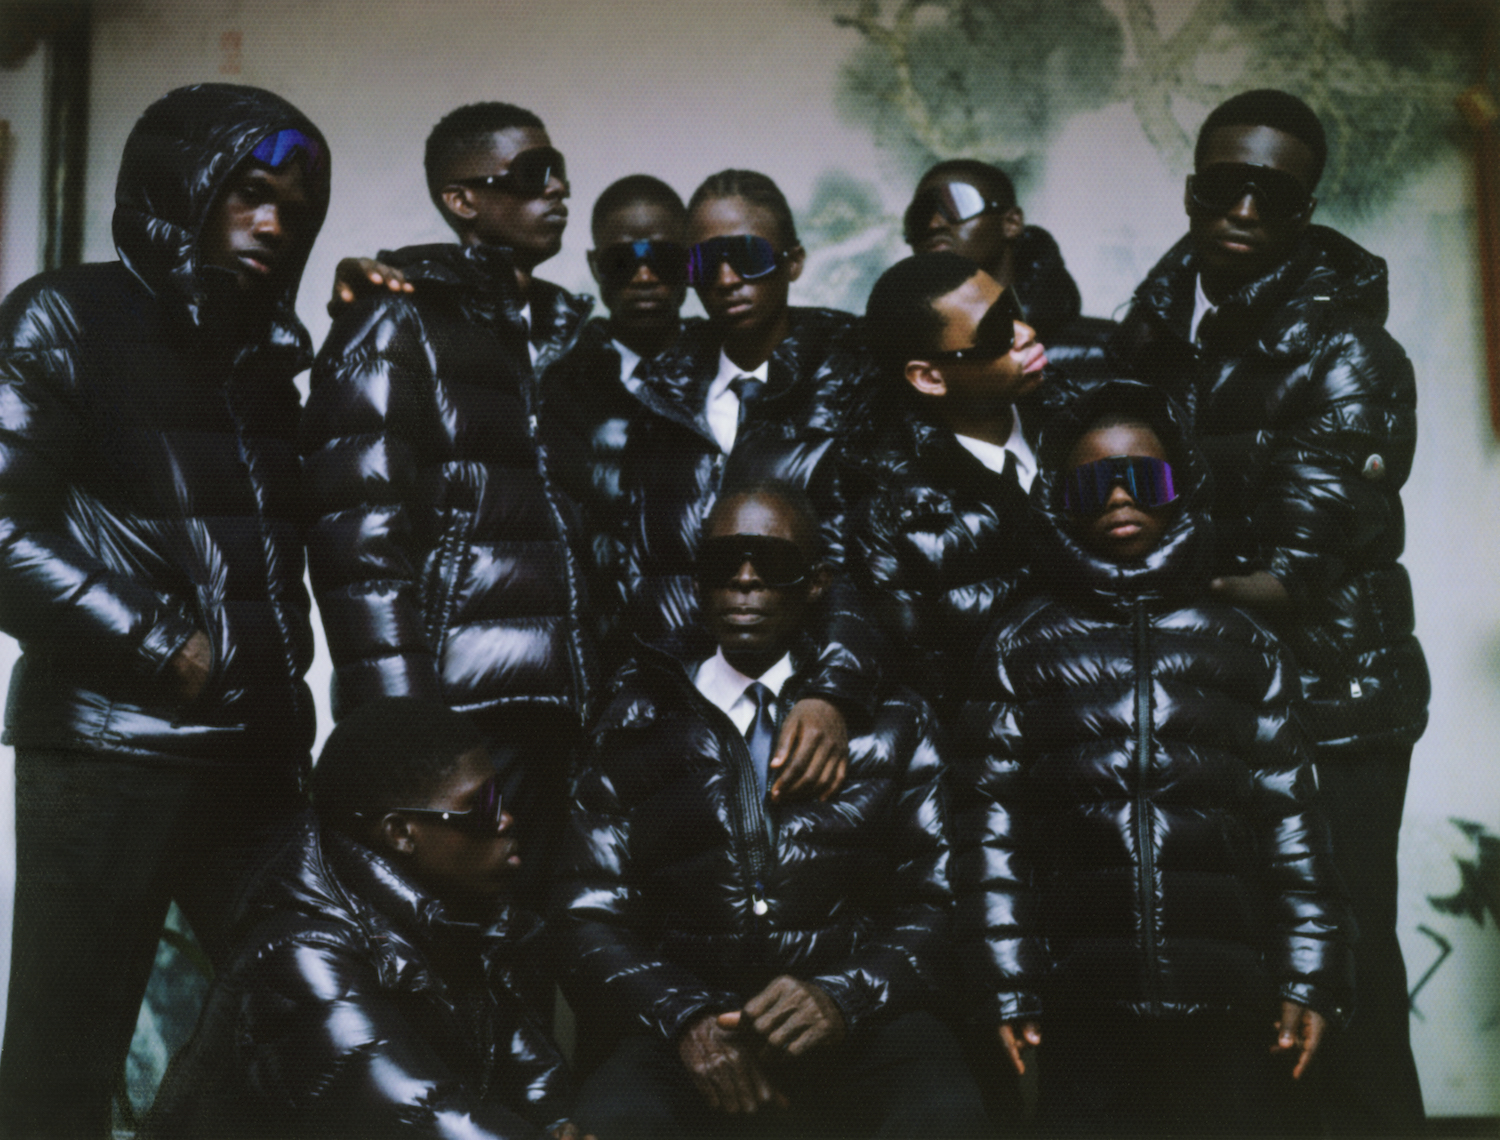 image therapy — Moncler Ad Campaign in Vogue Magazine (2022)